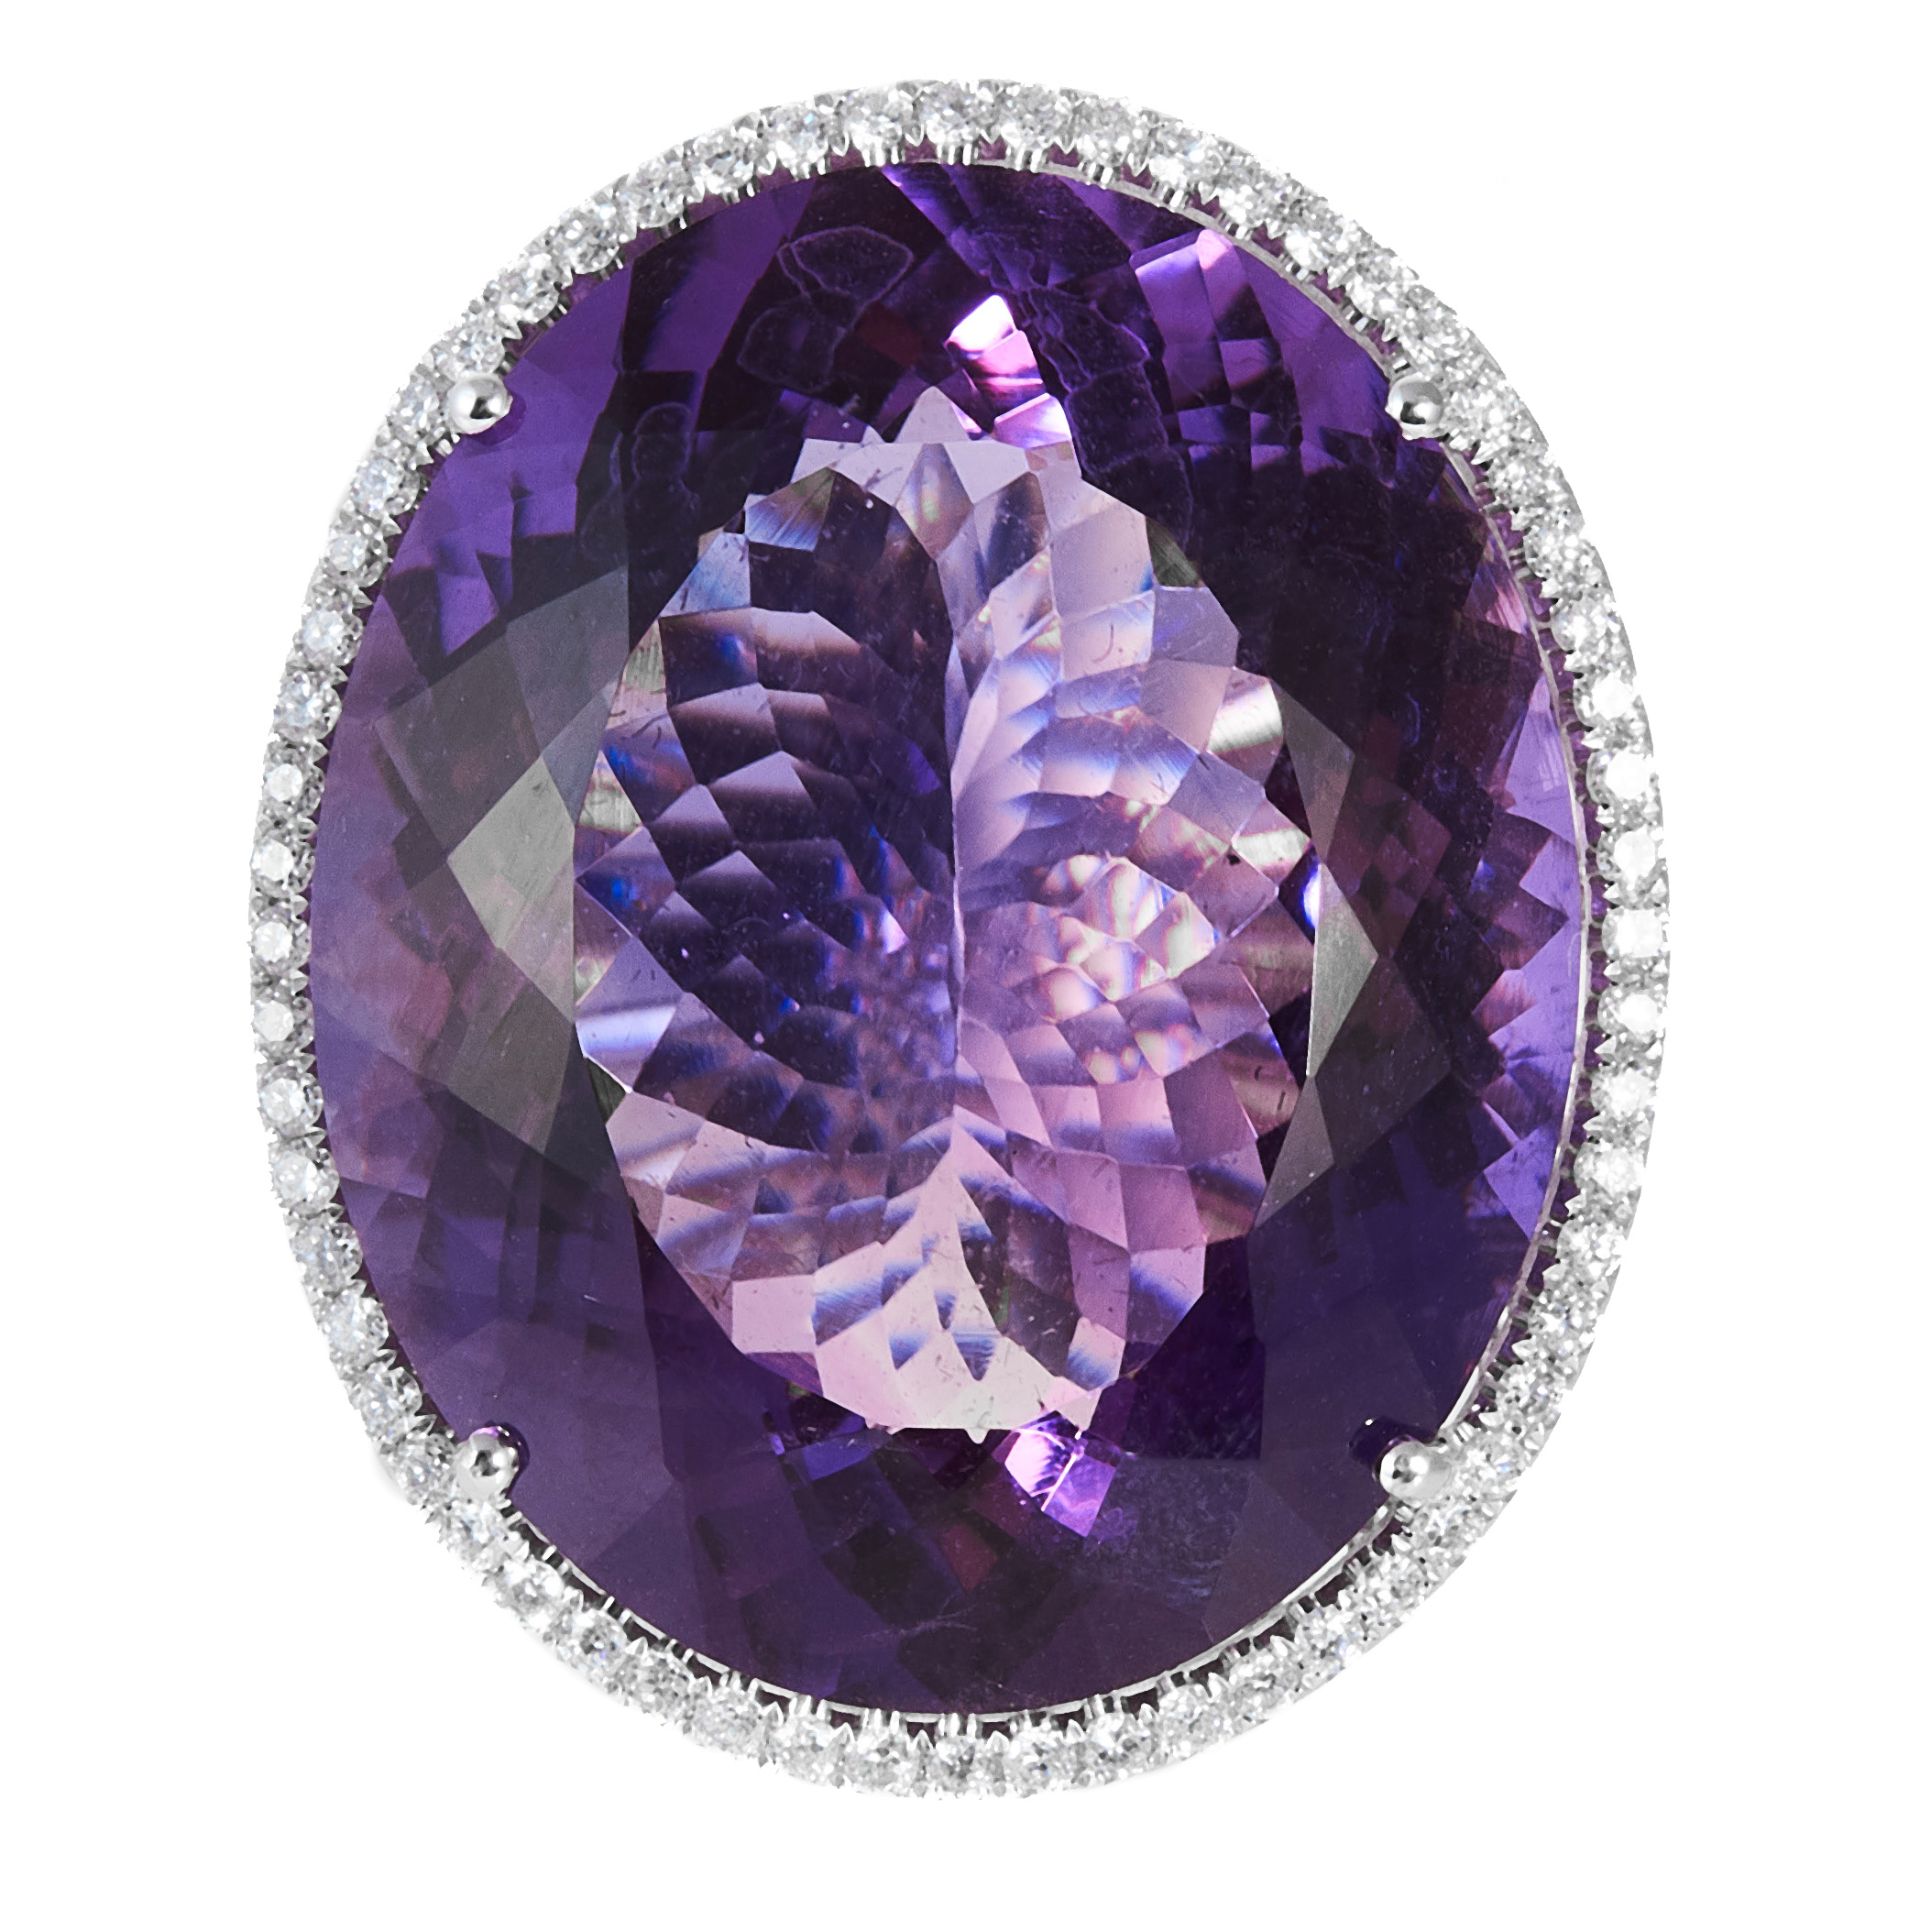 A 45 CARAT AMETHYST AND DIAMOND RING in 14ct white gold, set with a central amethyst of